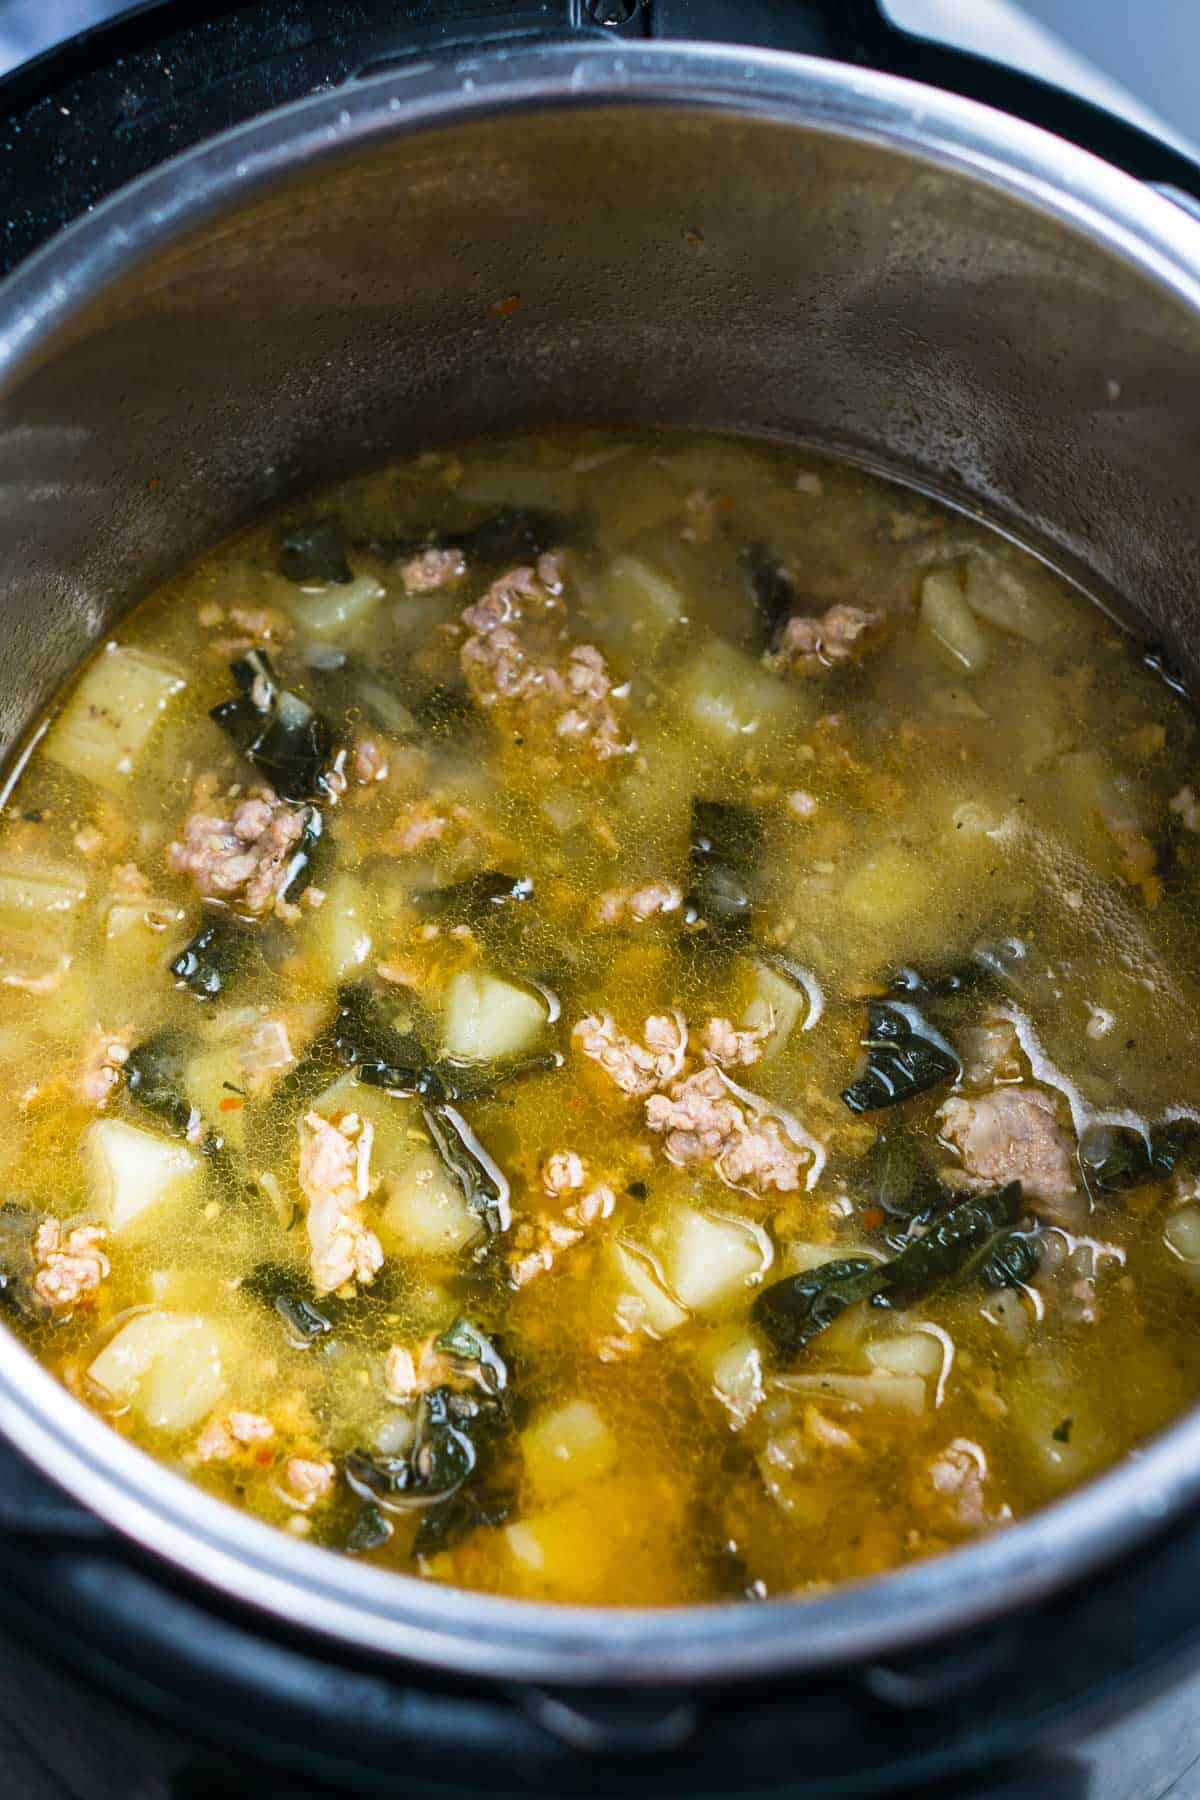 zuppa toscana soup ingredients in pot